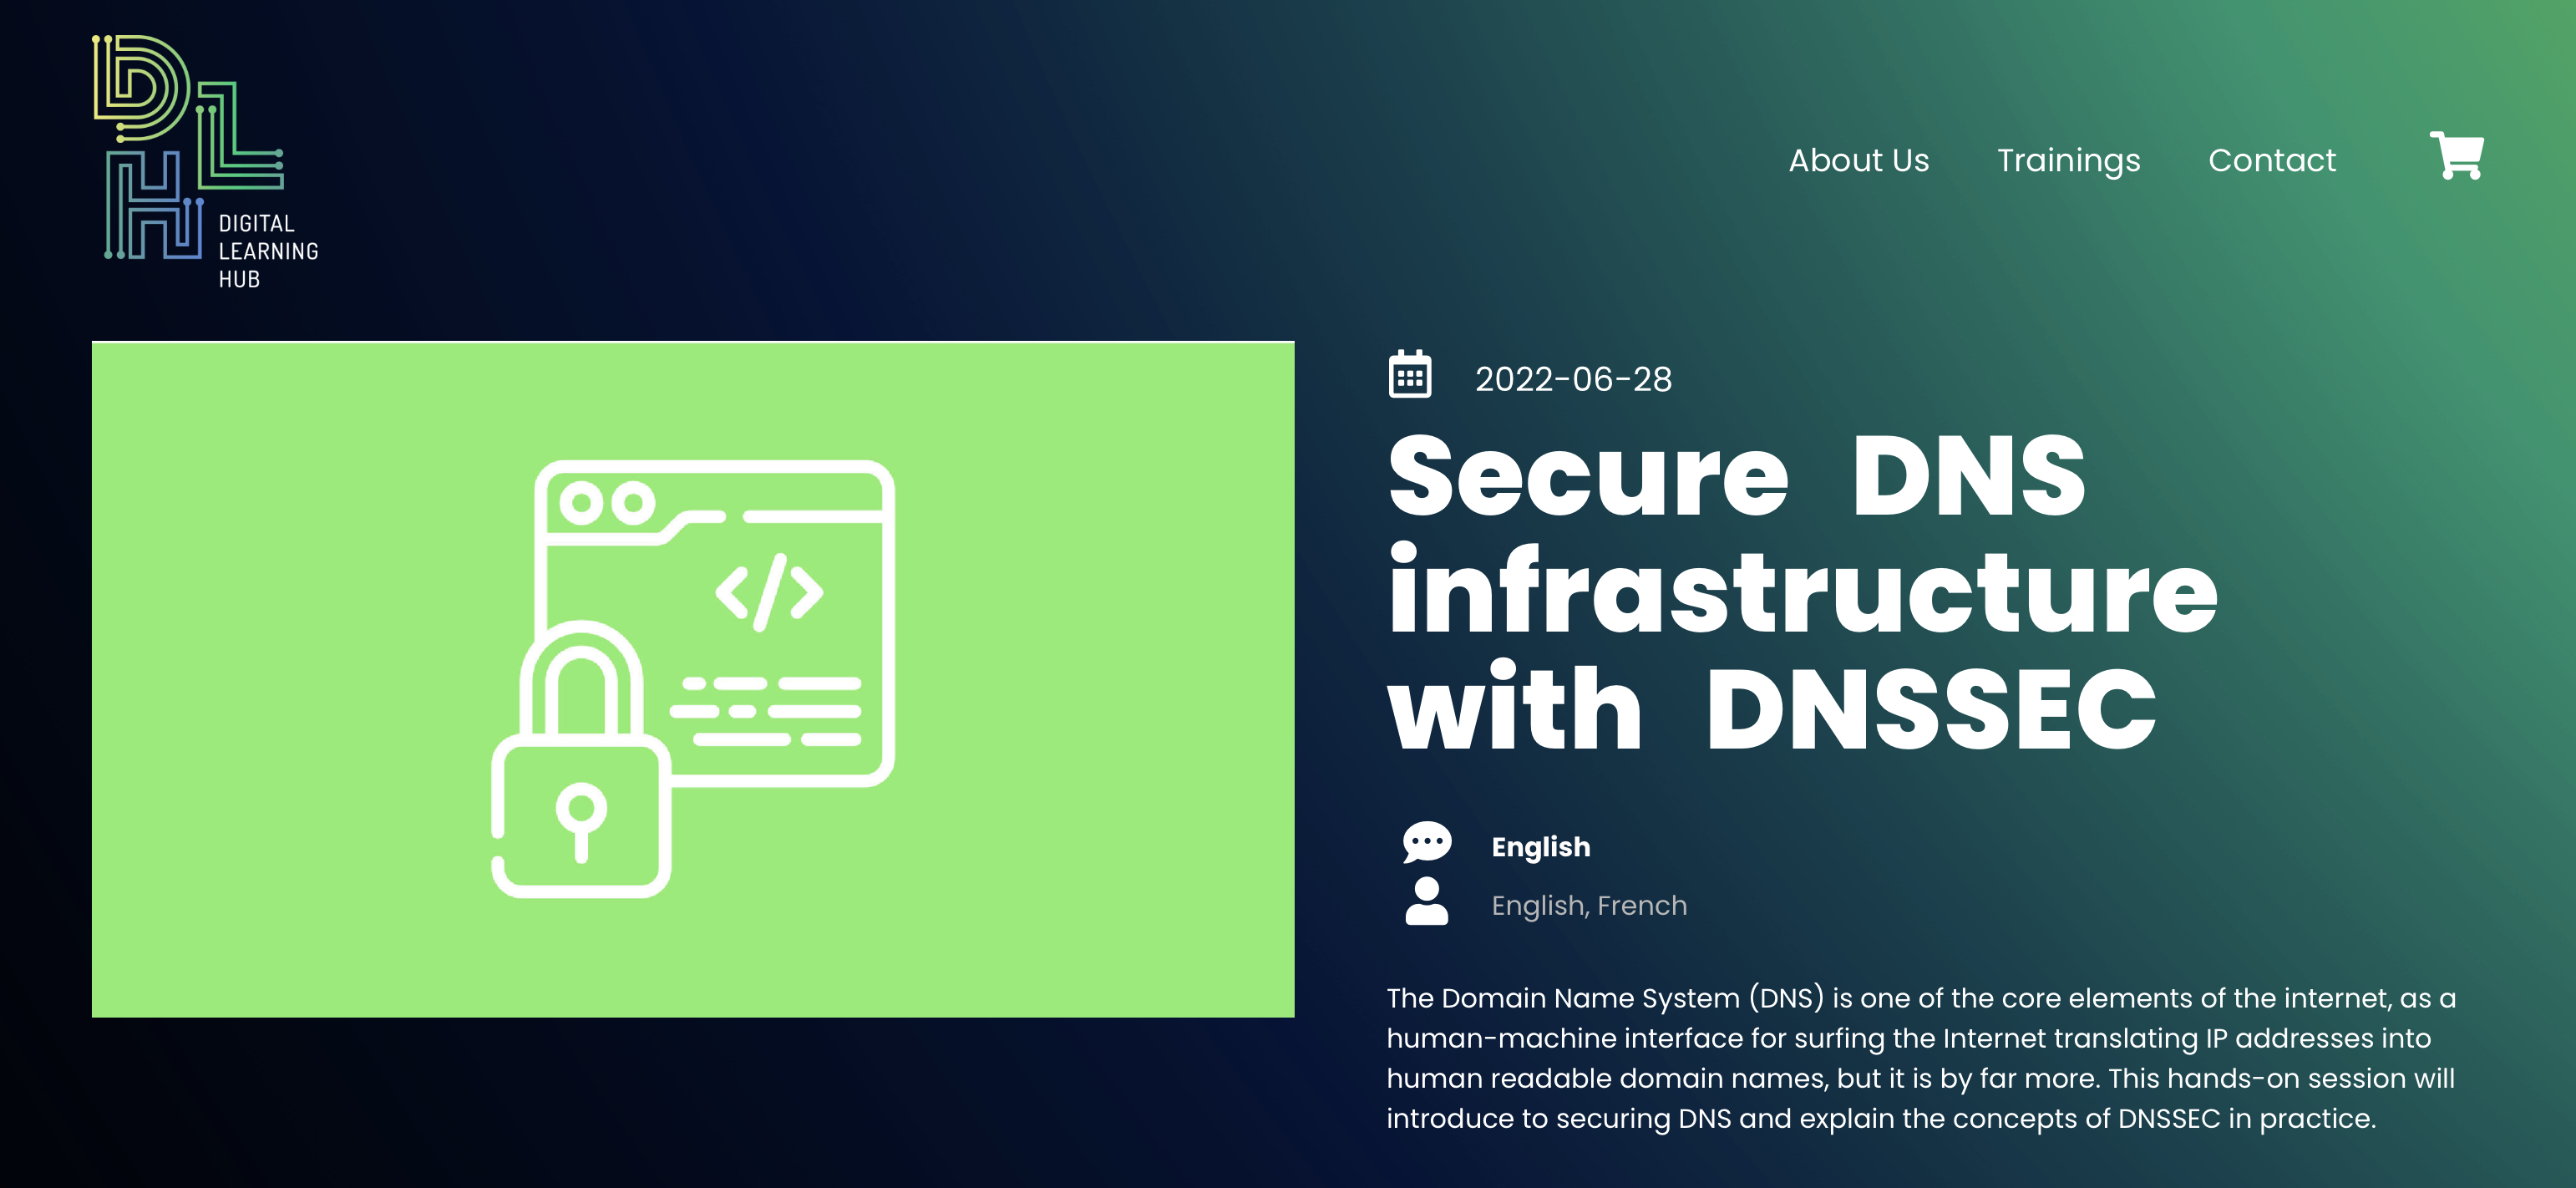 Secure DNS infrastructure with DNSSEC